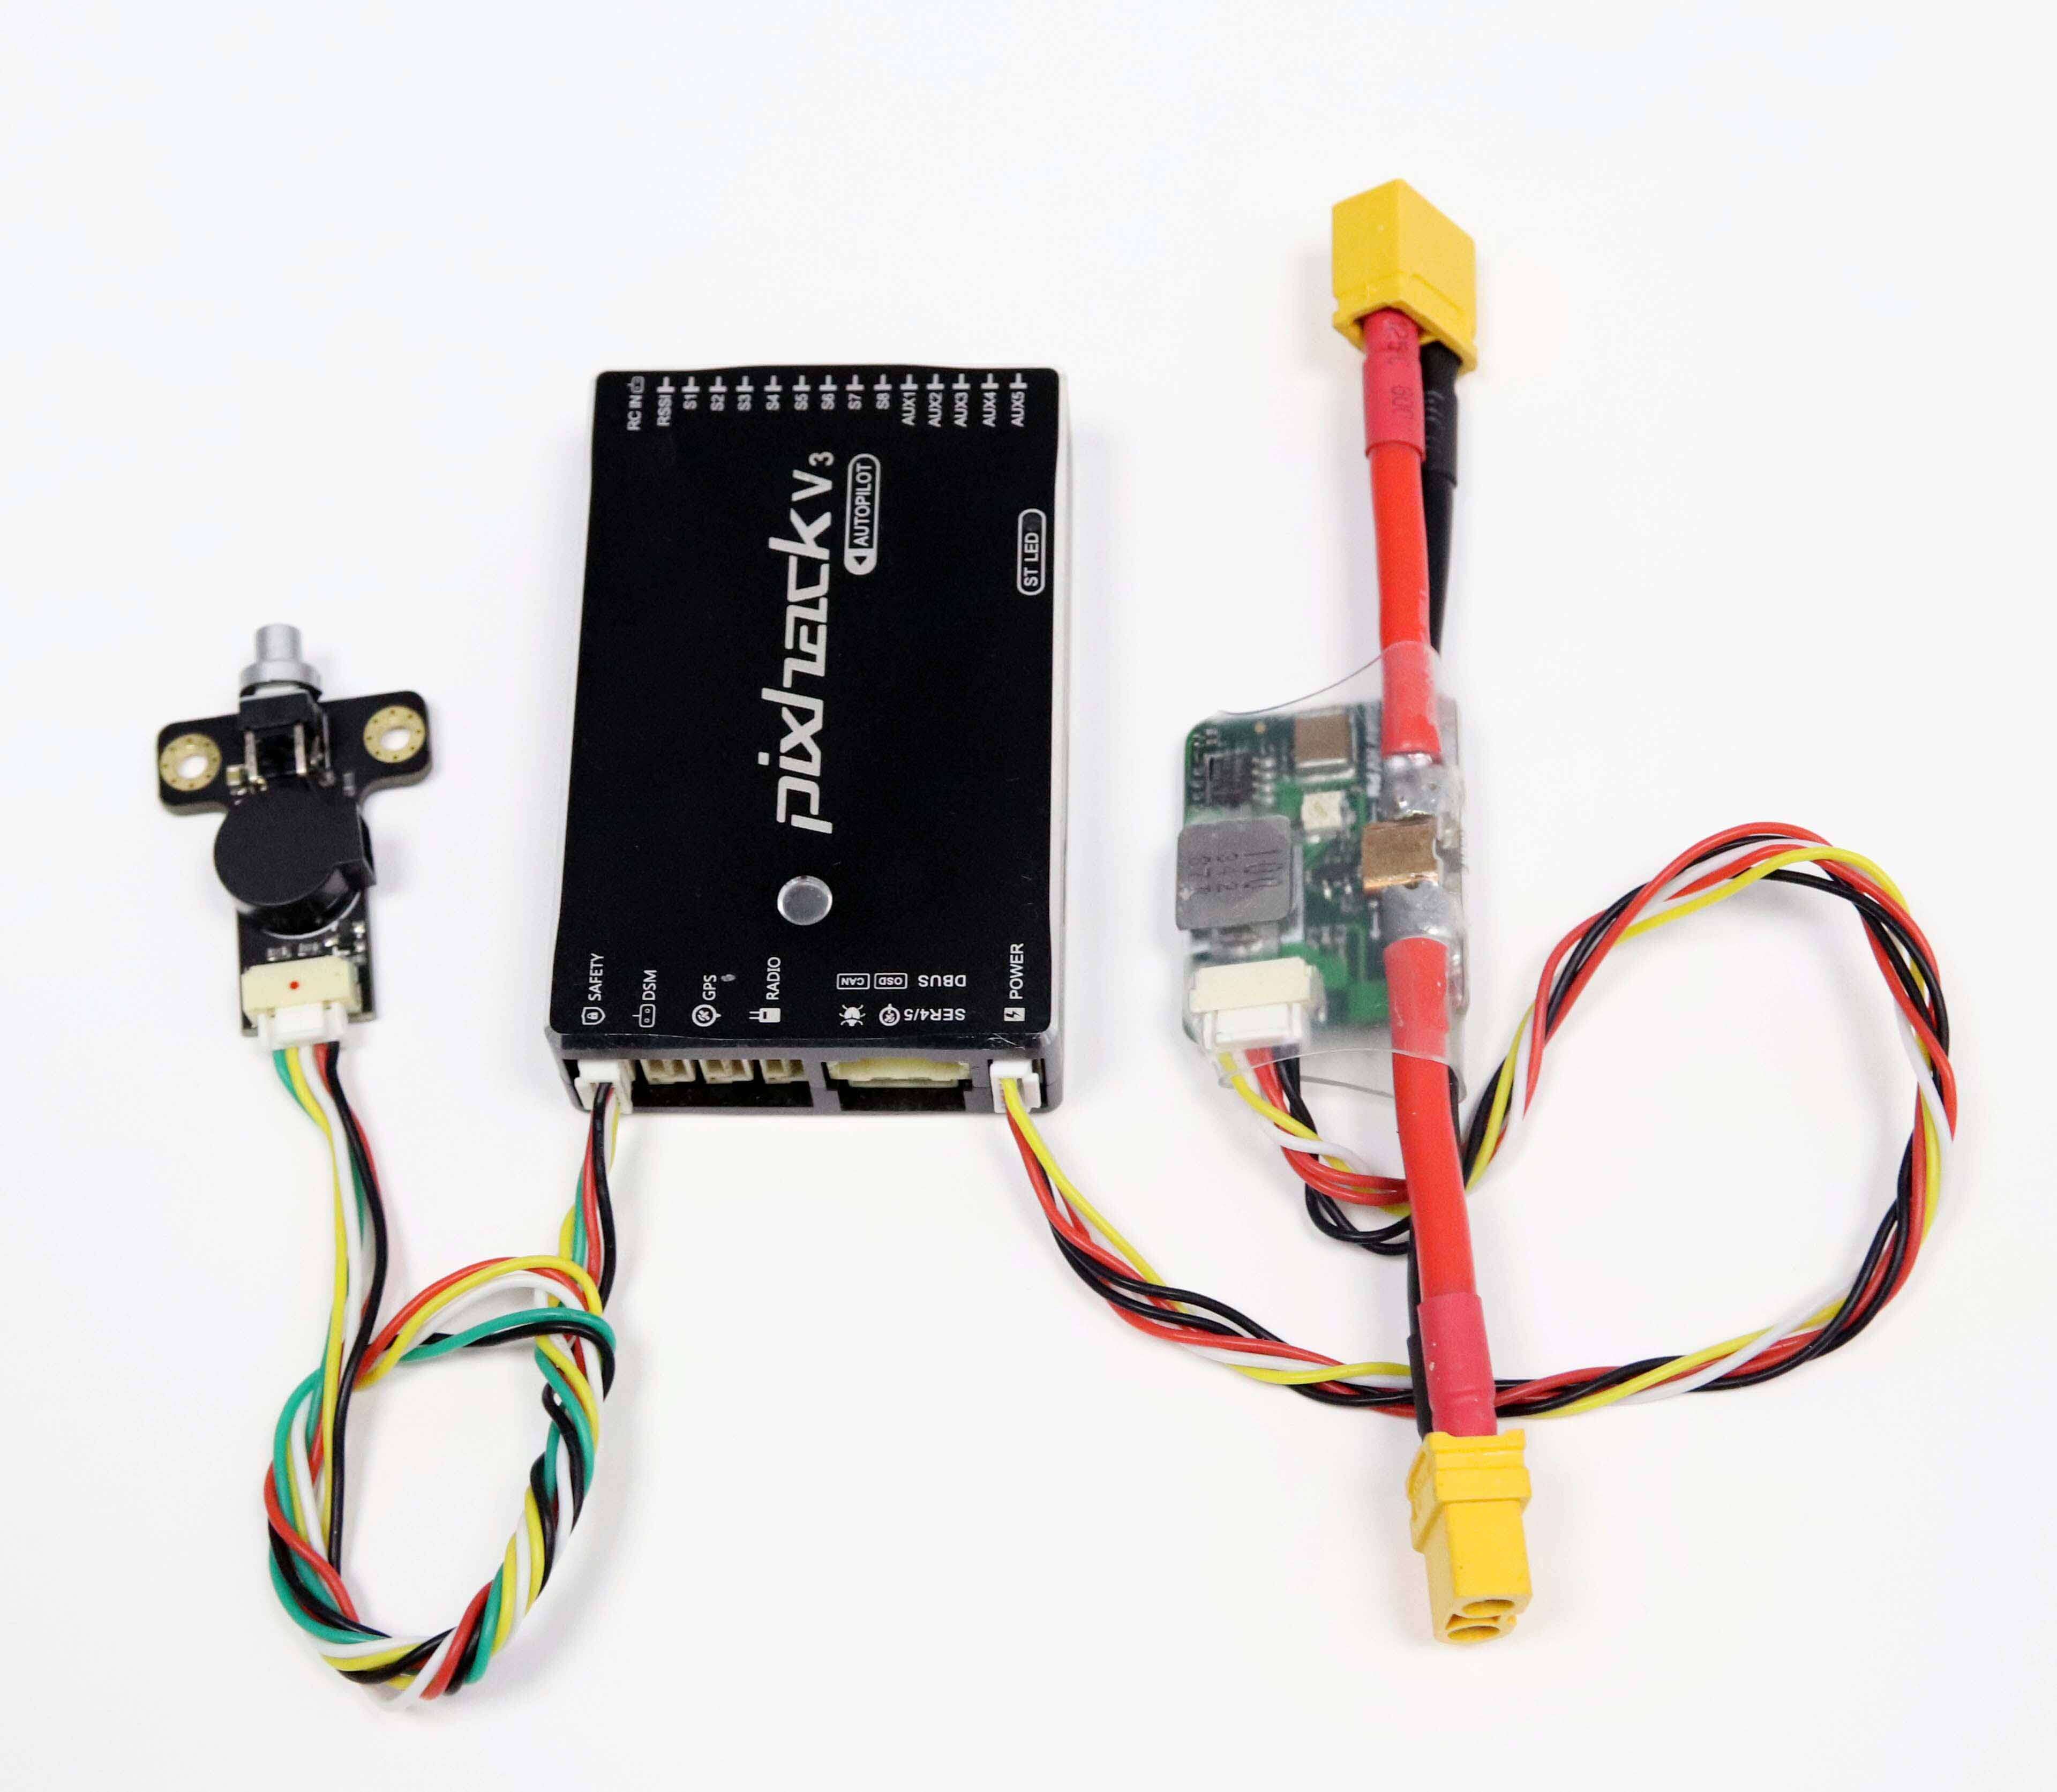 Connect buzzer and safety switch to Pixhack v3